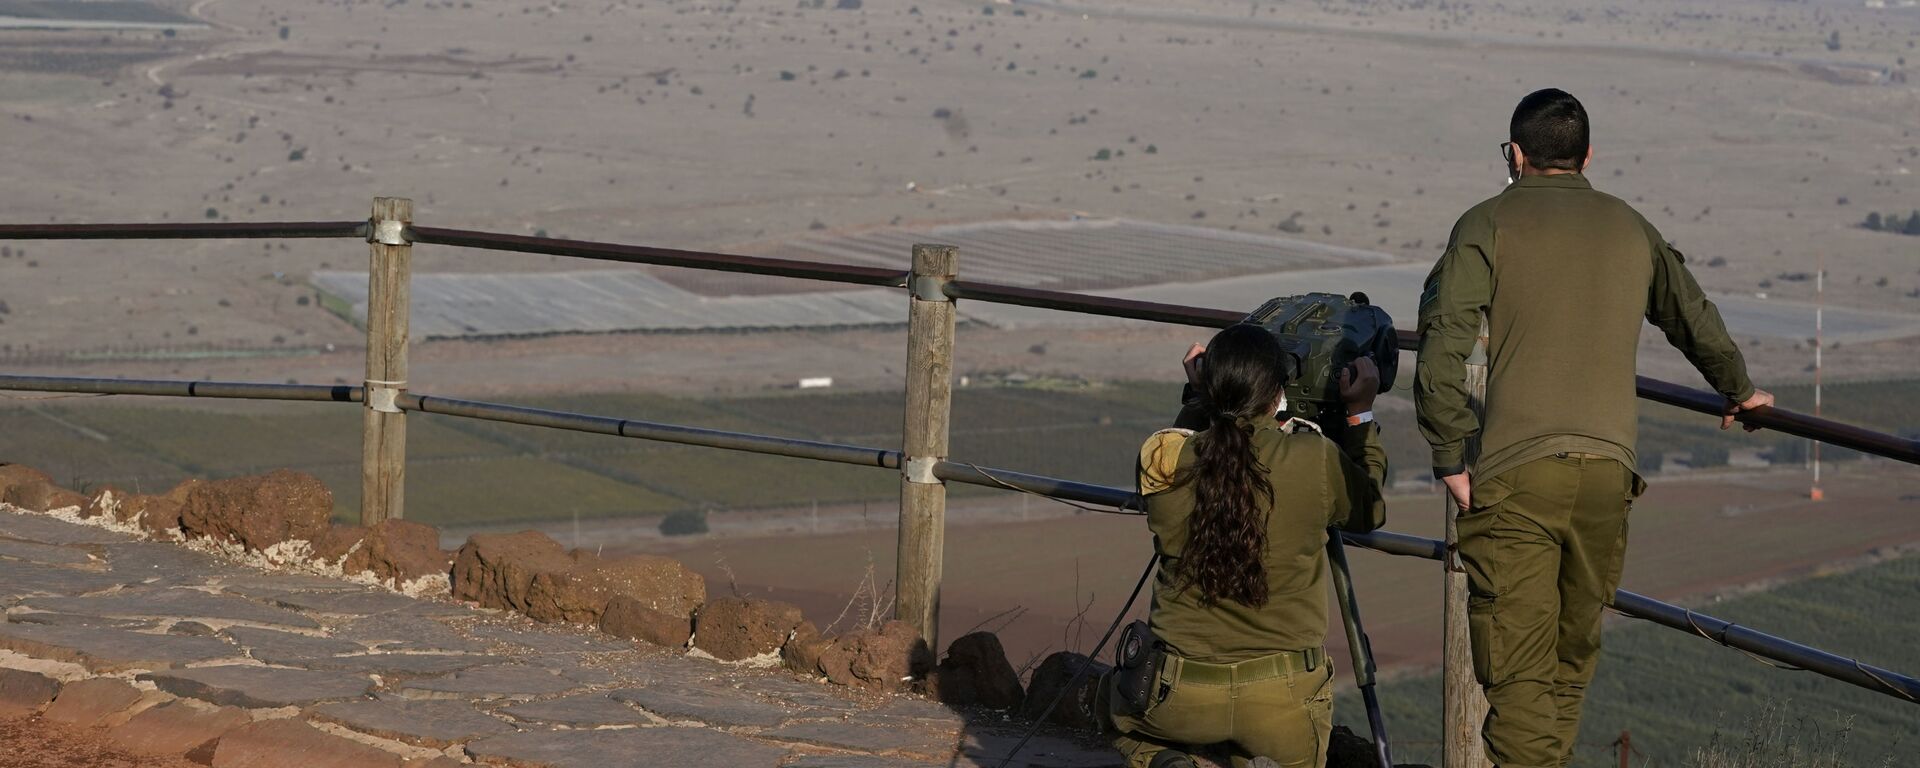 Israeli soldiers observe Al Qunaitra, Syria, across the border from Mount Bental in the Israeli-controlled Golan Heights, Thursday, Nov. 19, 2020, prior to a visit by Secretary of State Mike Pompeo and Israel's Foreign Minister Gabi Ashkenazi. - Sputnik International, 1920, 26.06.2021